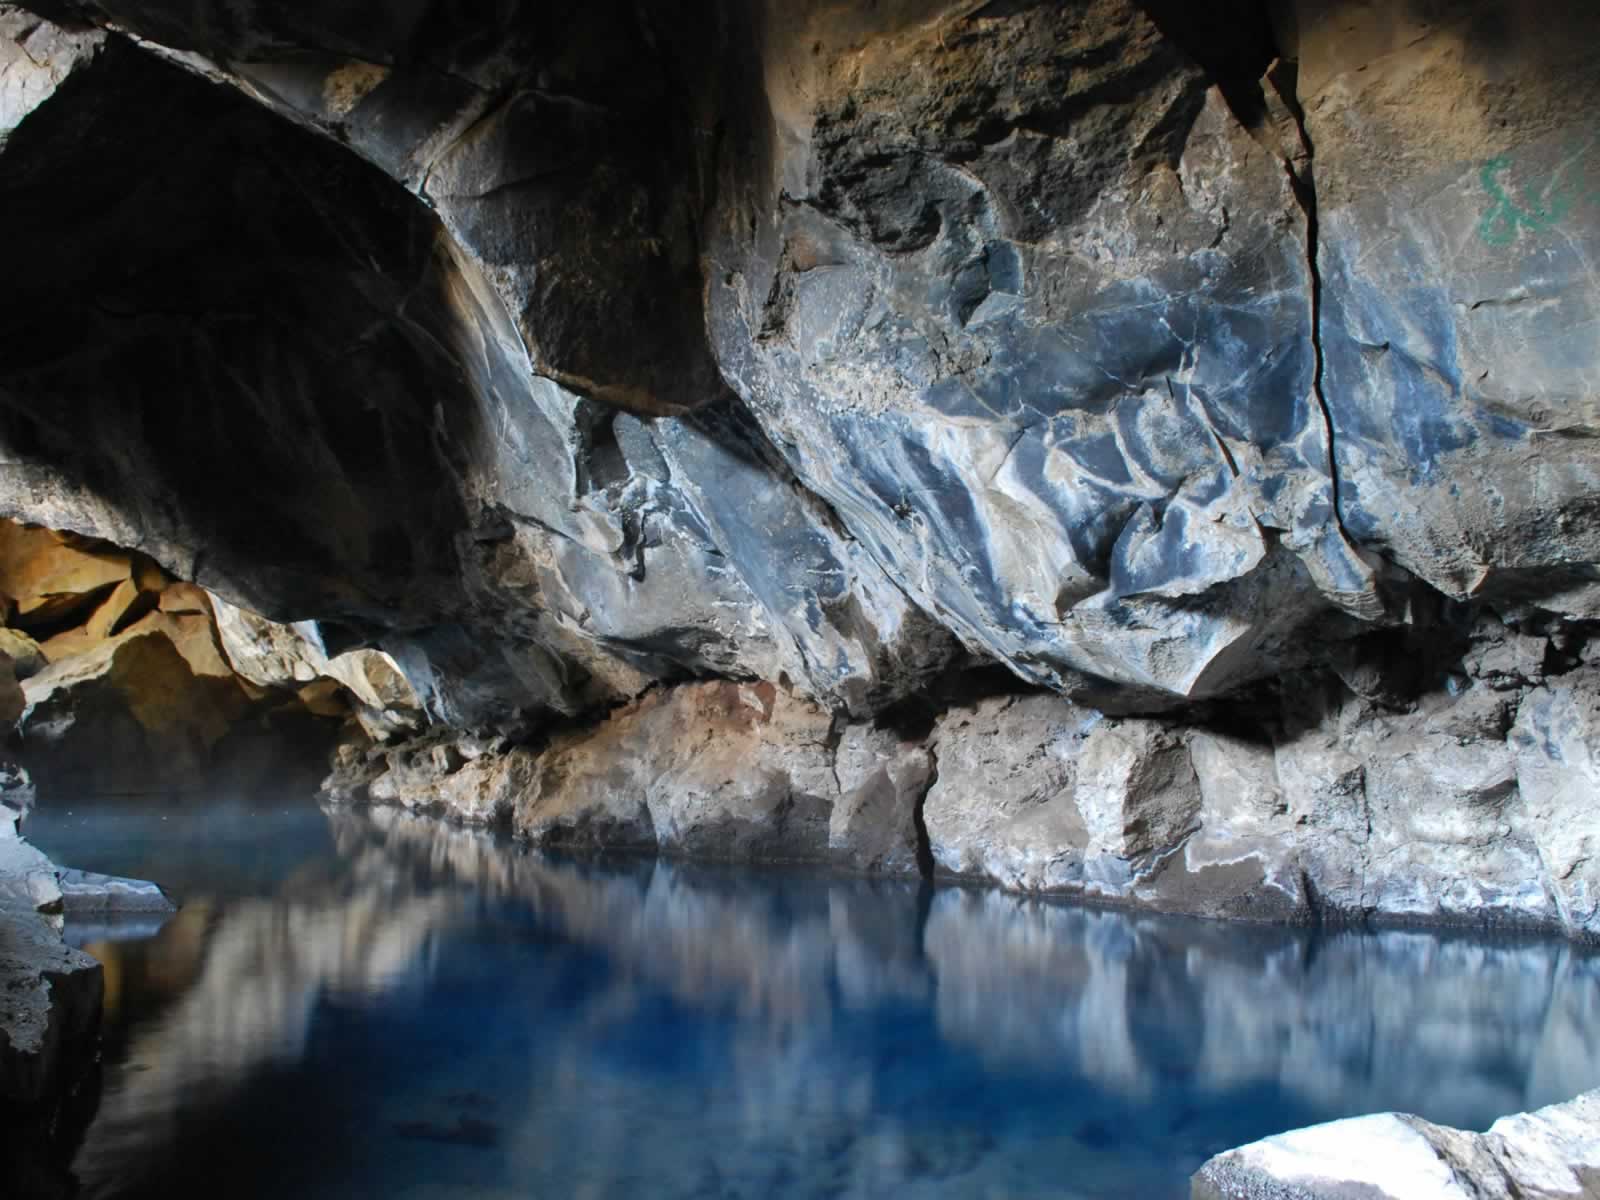 A cave with water and rocks in it